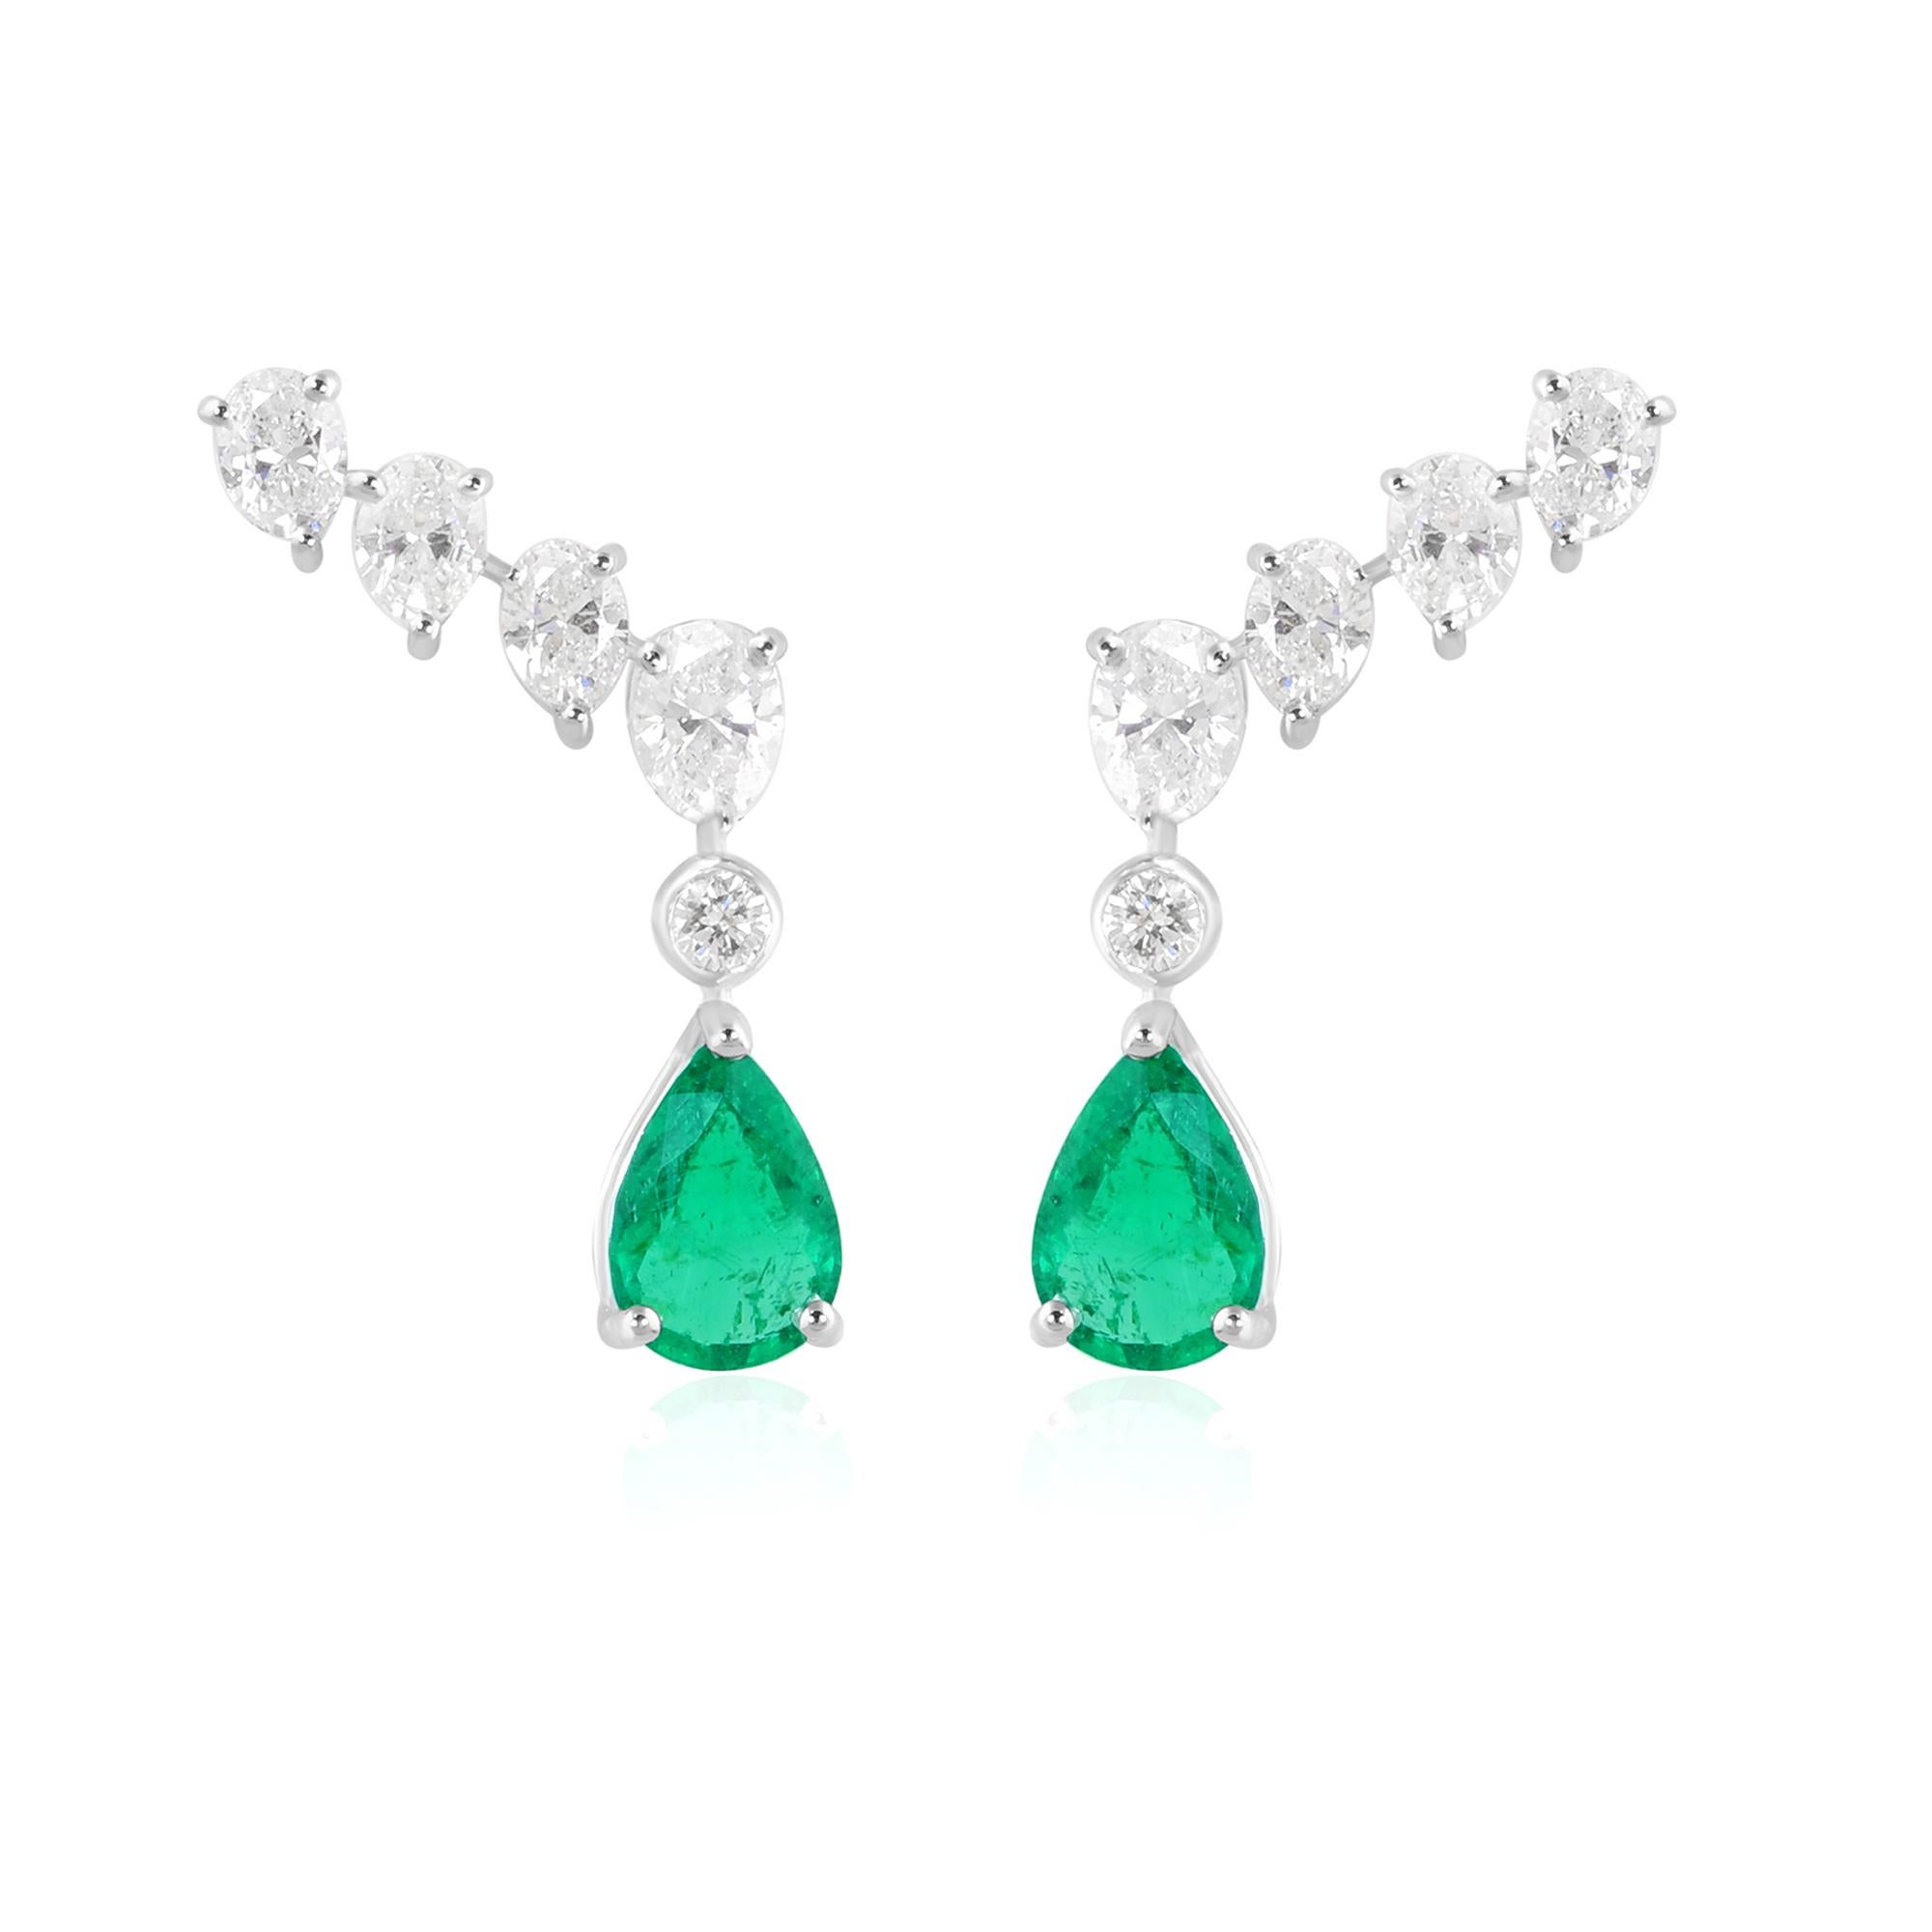 Item Code :- SEE-15644C (14k)
Gross Wt. :- 2.93 gm
14k Solid White Gold Wt. :- 2.56 gm
Natural Diamond Wt. :- 1.05 Ct. ( AVERAGE DIAMOND CLARITY SI1-SI2 & COLOR H-I )
Emerald Wt. :- 0.85 Ct.

✦ Sizing
.....................
We can adjust most items